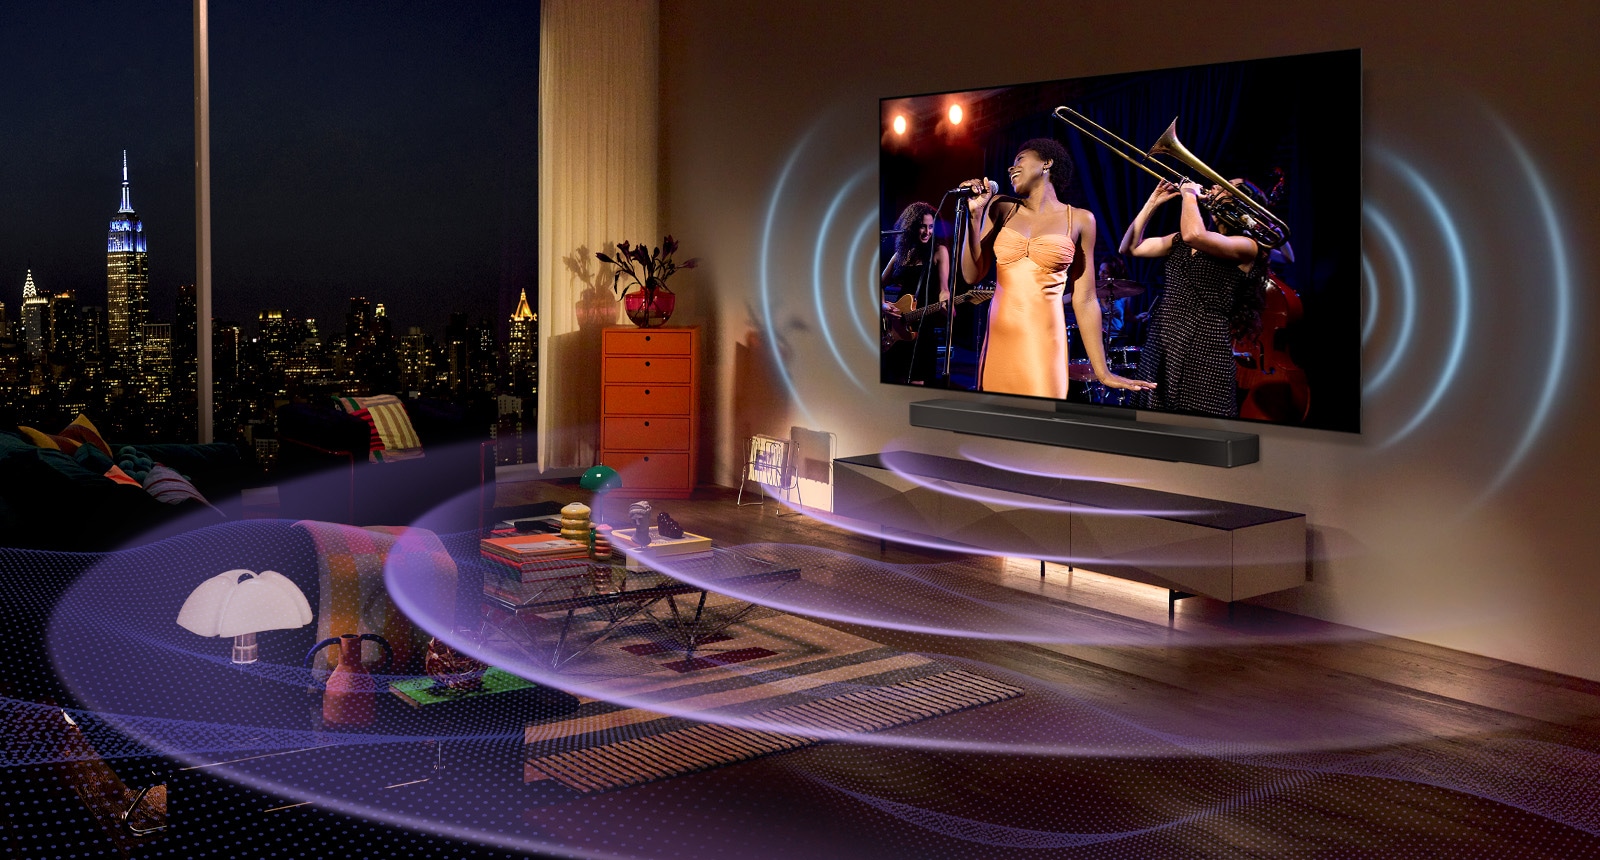 An image of an LG OLED TV in a room showing a music concert. Blue curved lines depicting TV sound and purple curved lines expressing Soundbar sound fill the space.